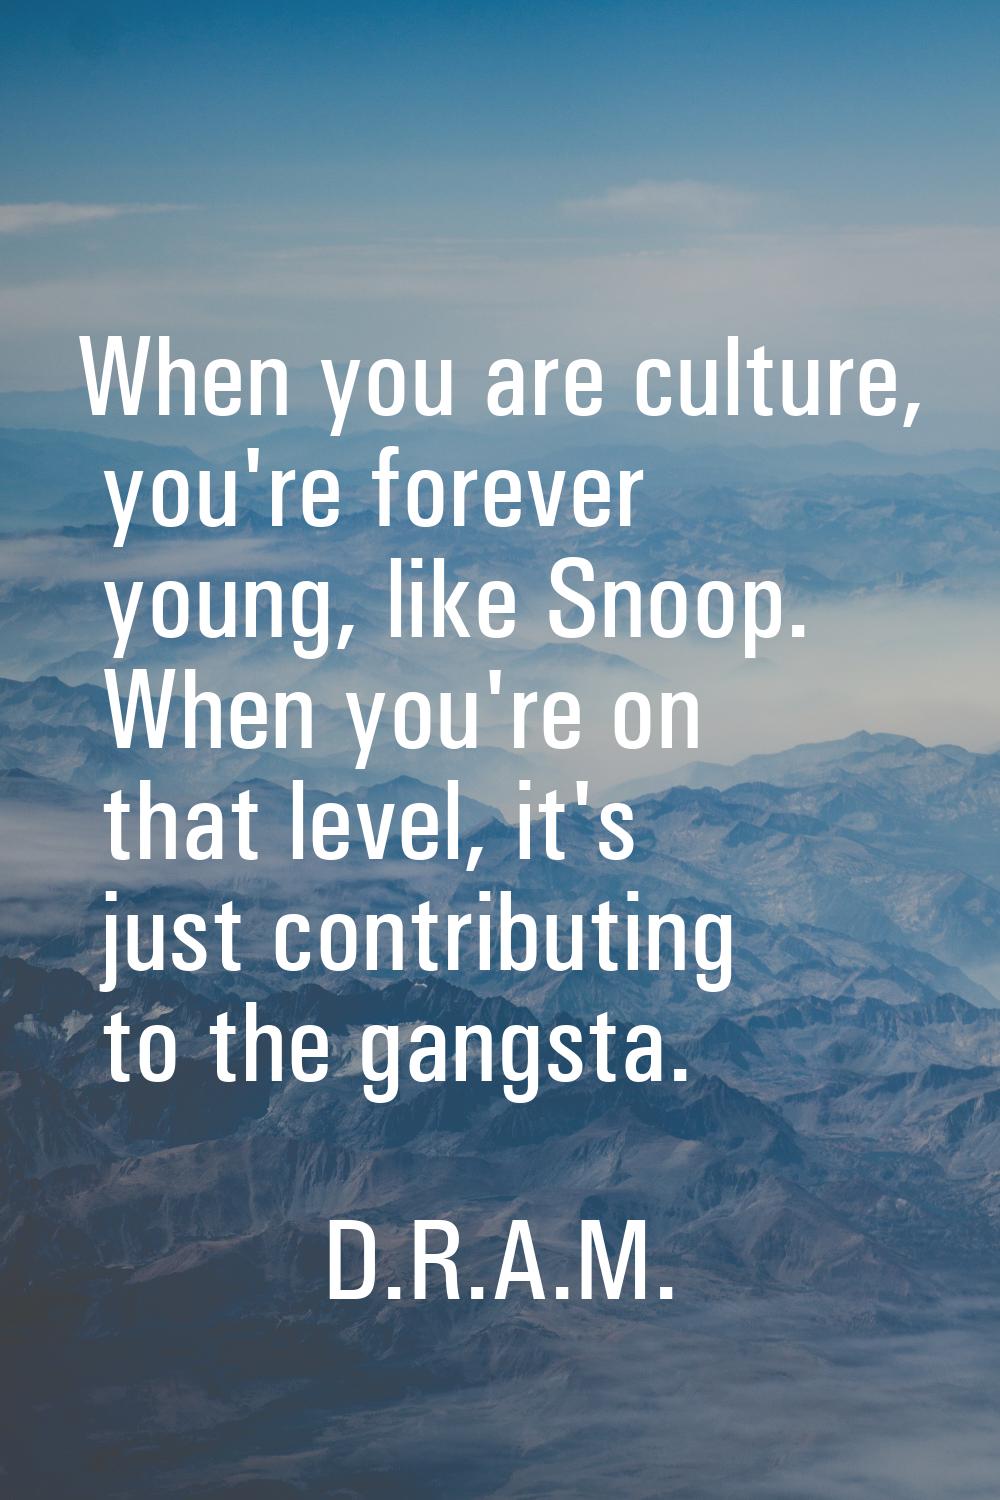 When you are culture, you're forever young, like Snoop. When you're on that level, it's just contri